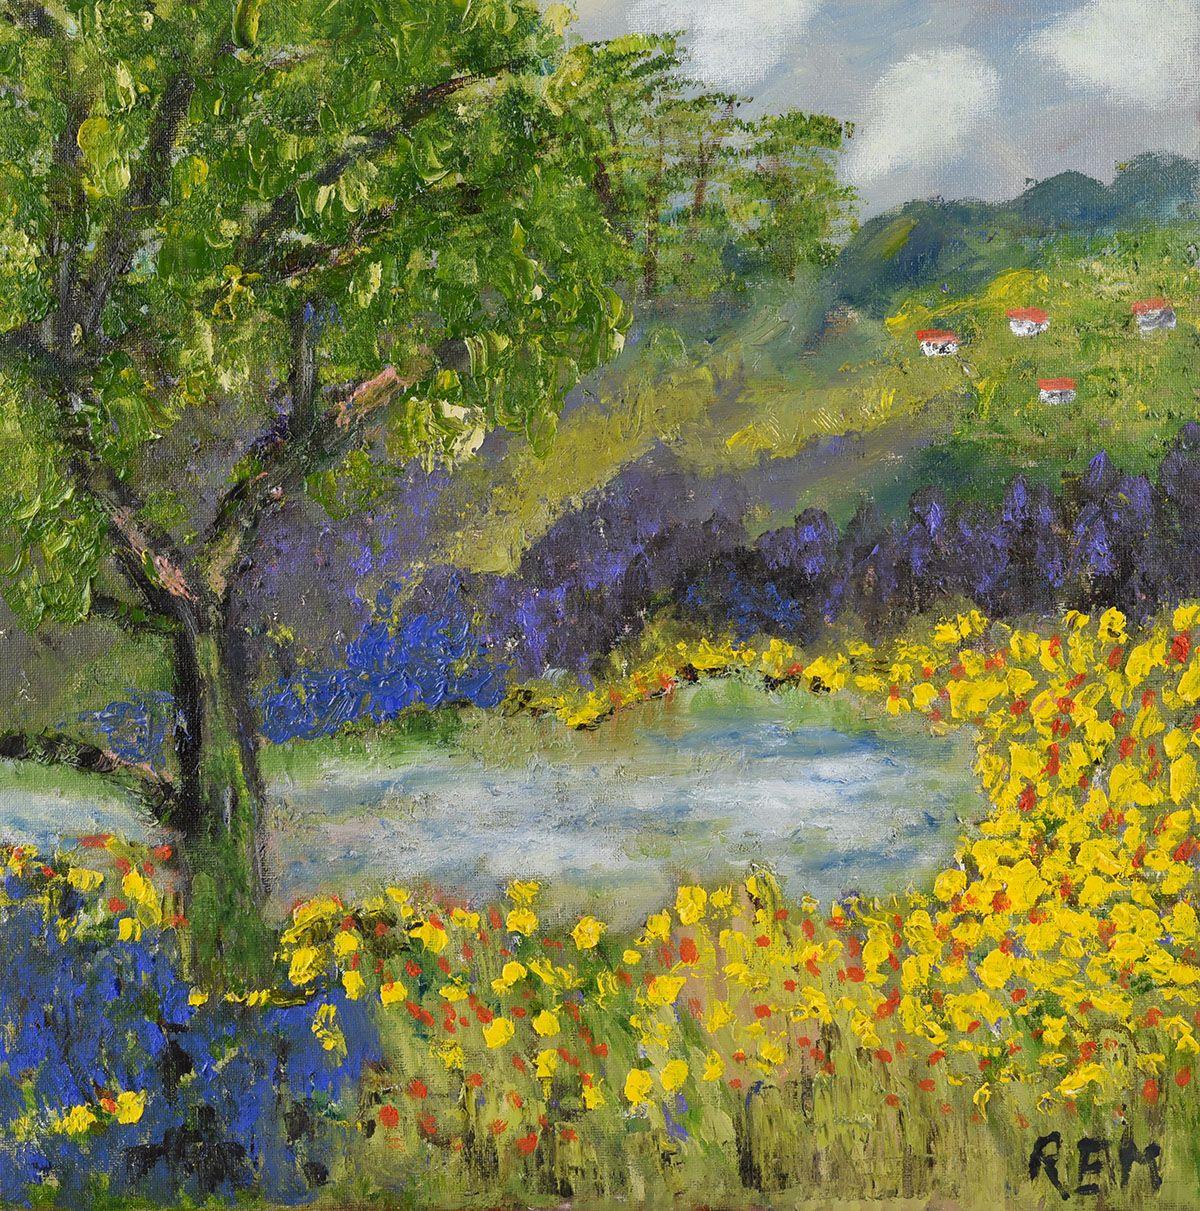 Spring Garden Abstract Landscape with Yellow Flowers and Tree by British Artist - Gray Abstract Painting by Rose Elizabeth Moorcroft